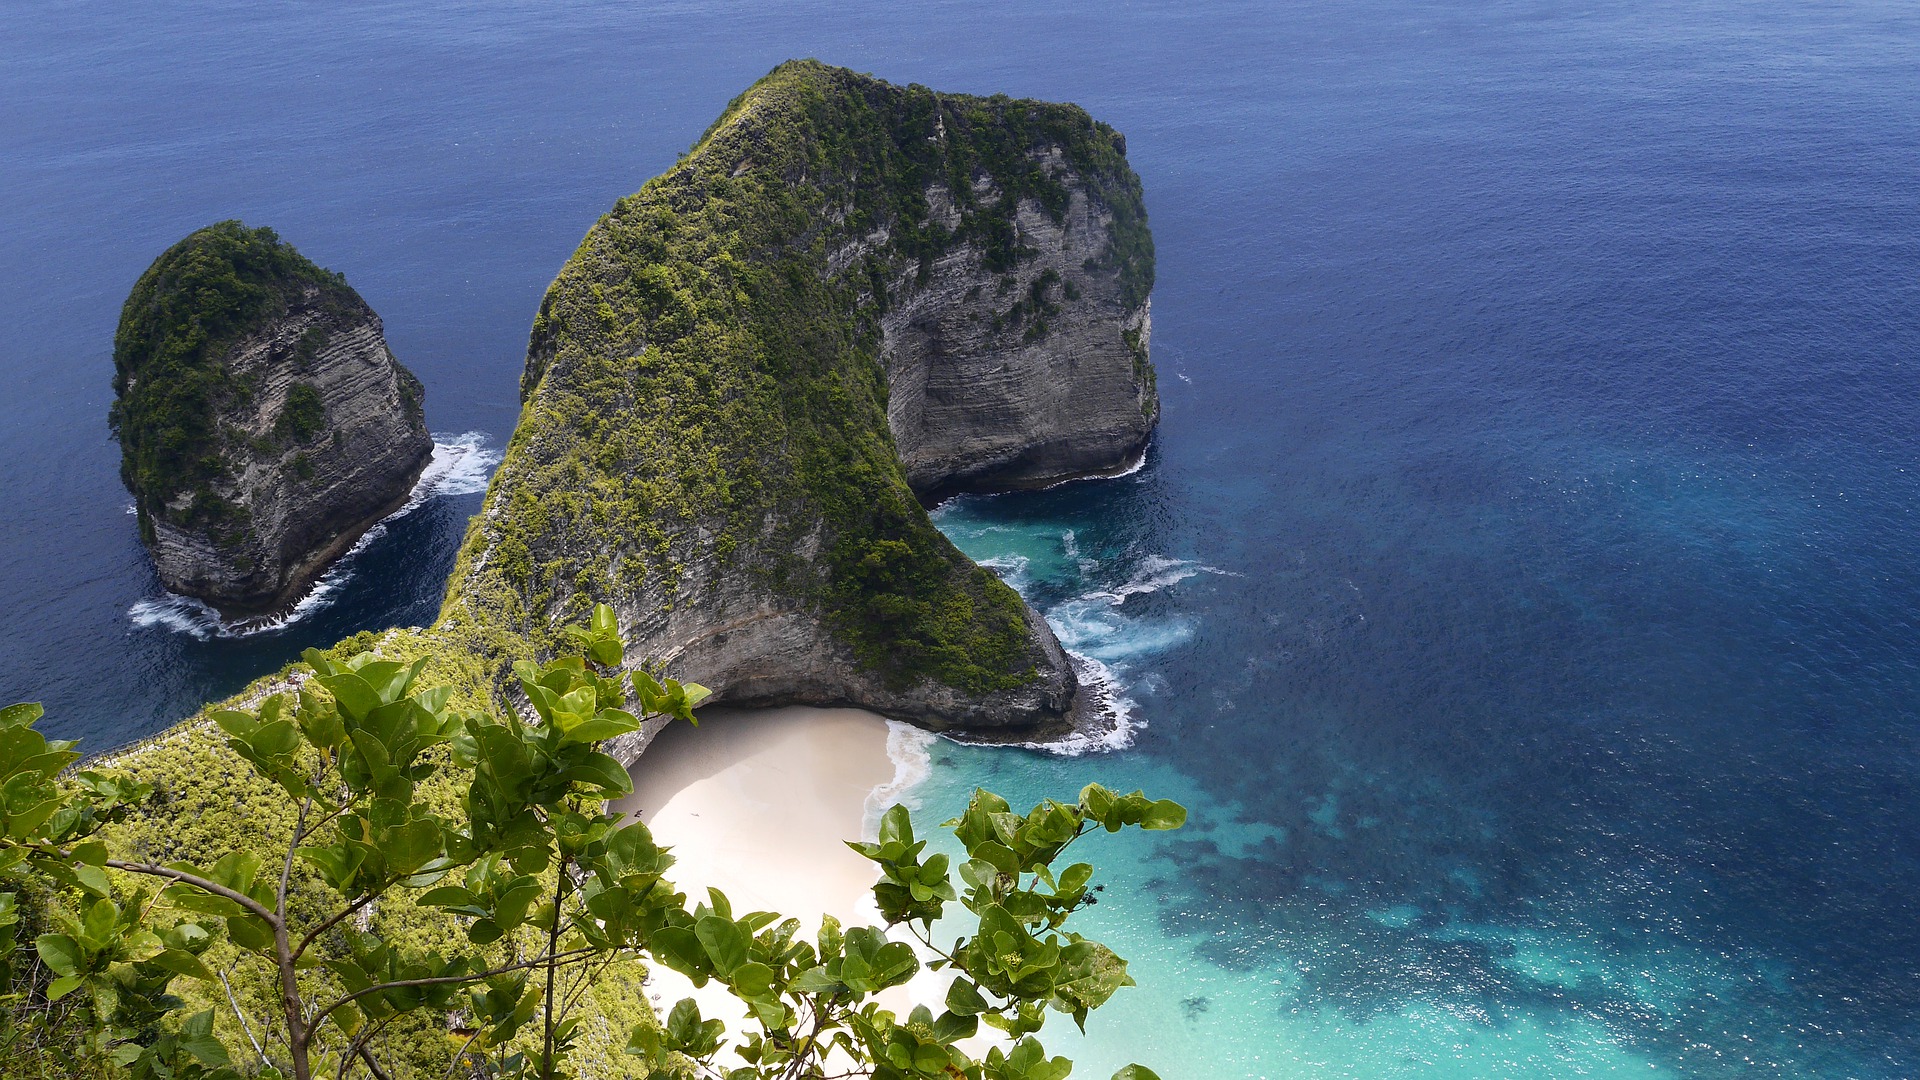 Bali Aims to Reopen